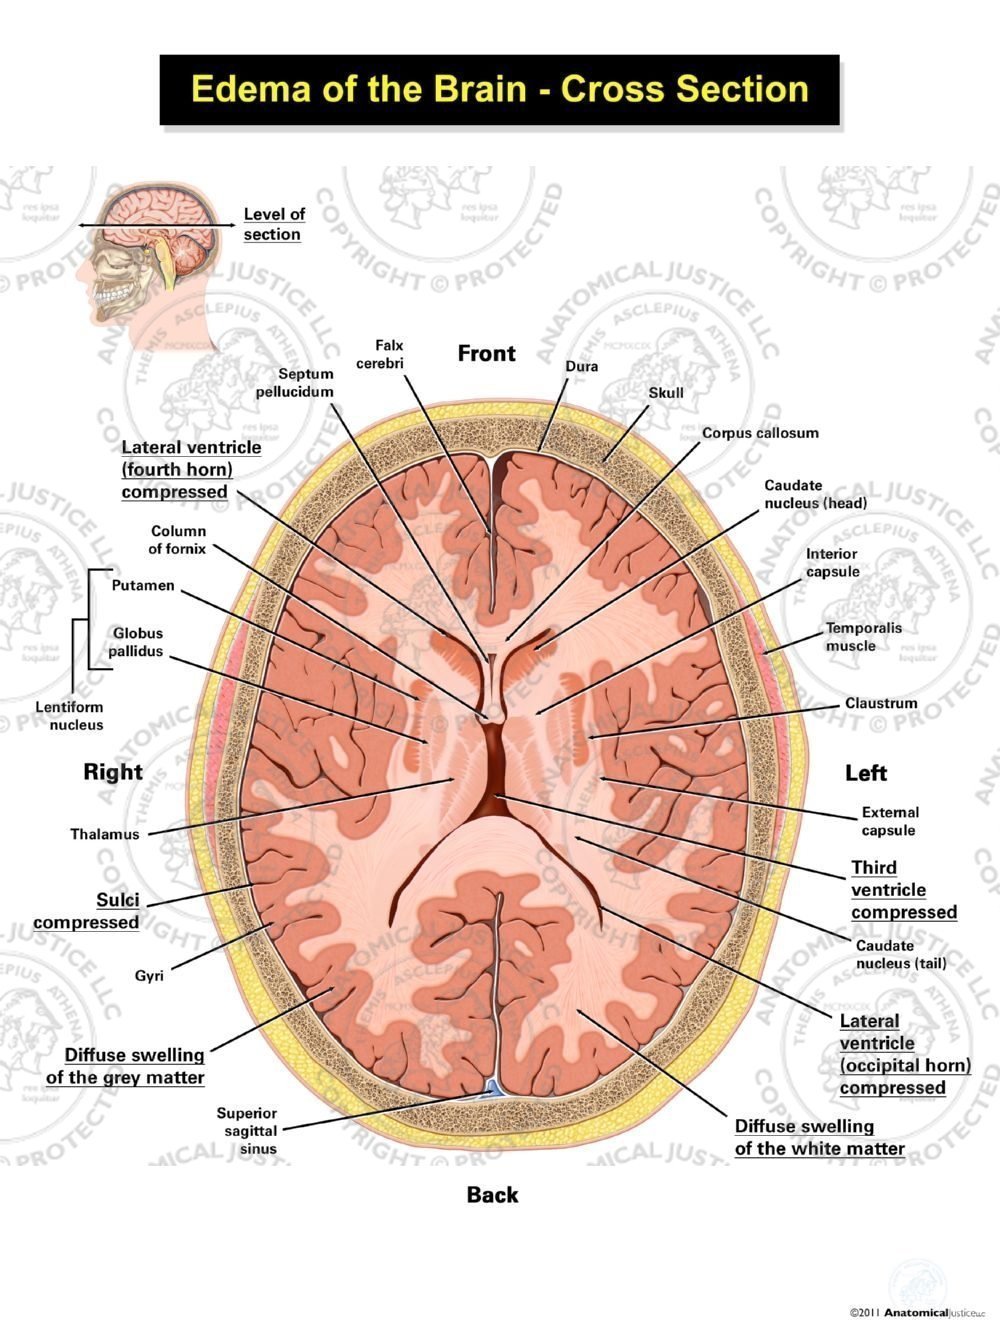 Edema of the Brain – Cross Section